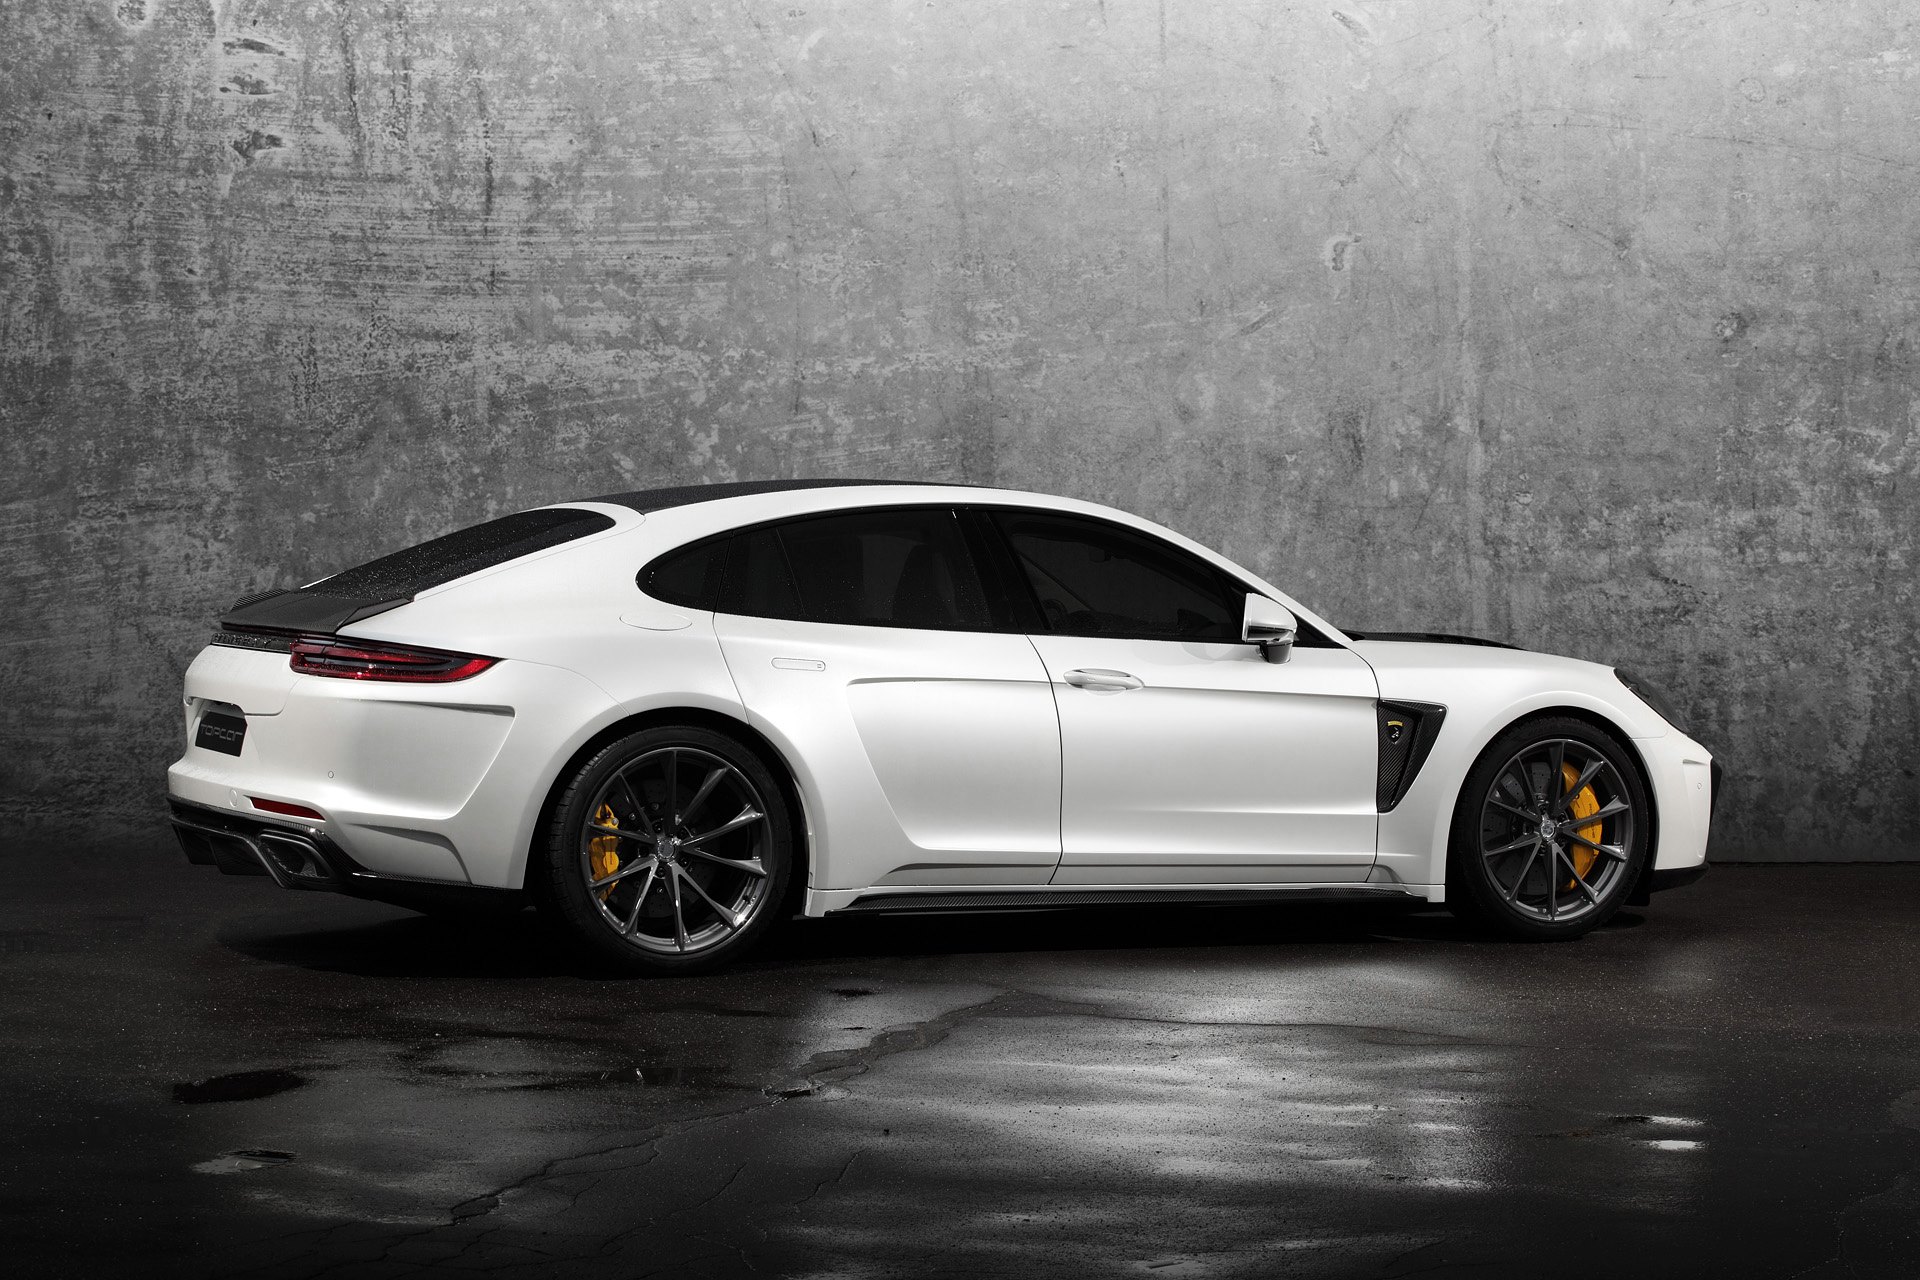 Carbon Fiber Kit For 2017 Panamera Turbo Presented By Topcar Has